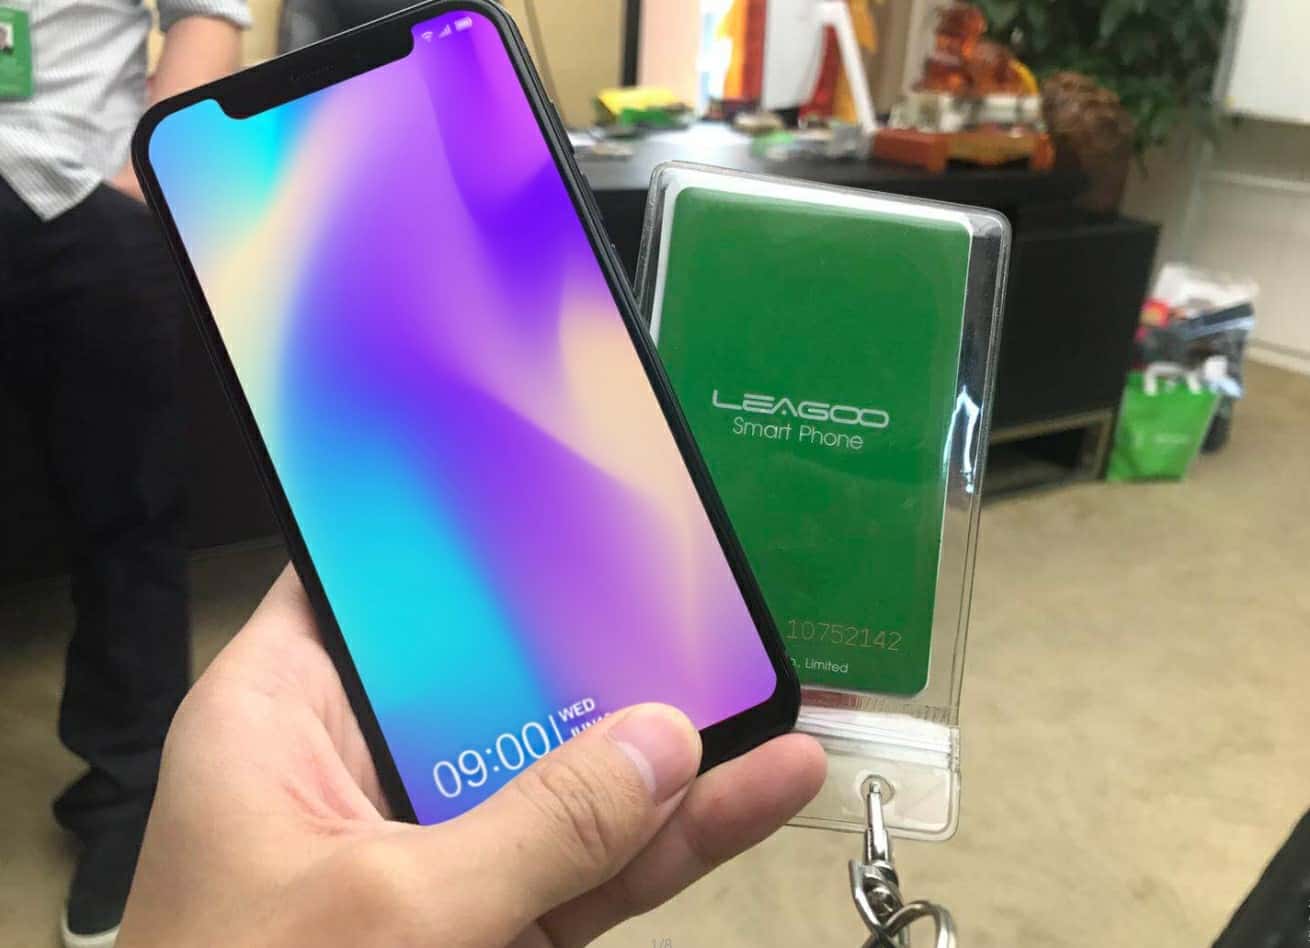 Leagoo S9 a.k.a the iPhone X clone launched for $300